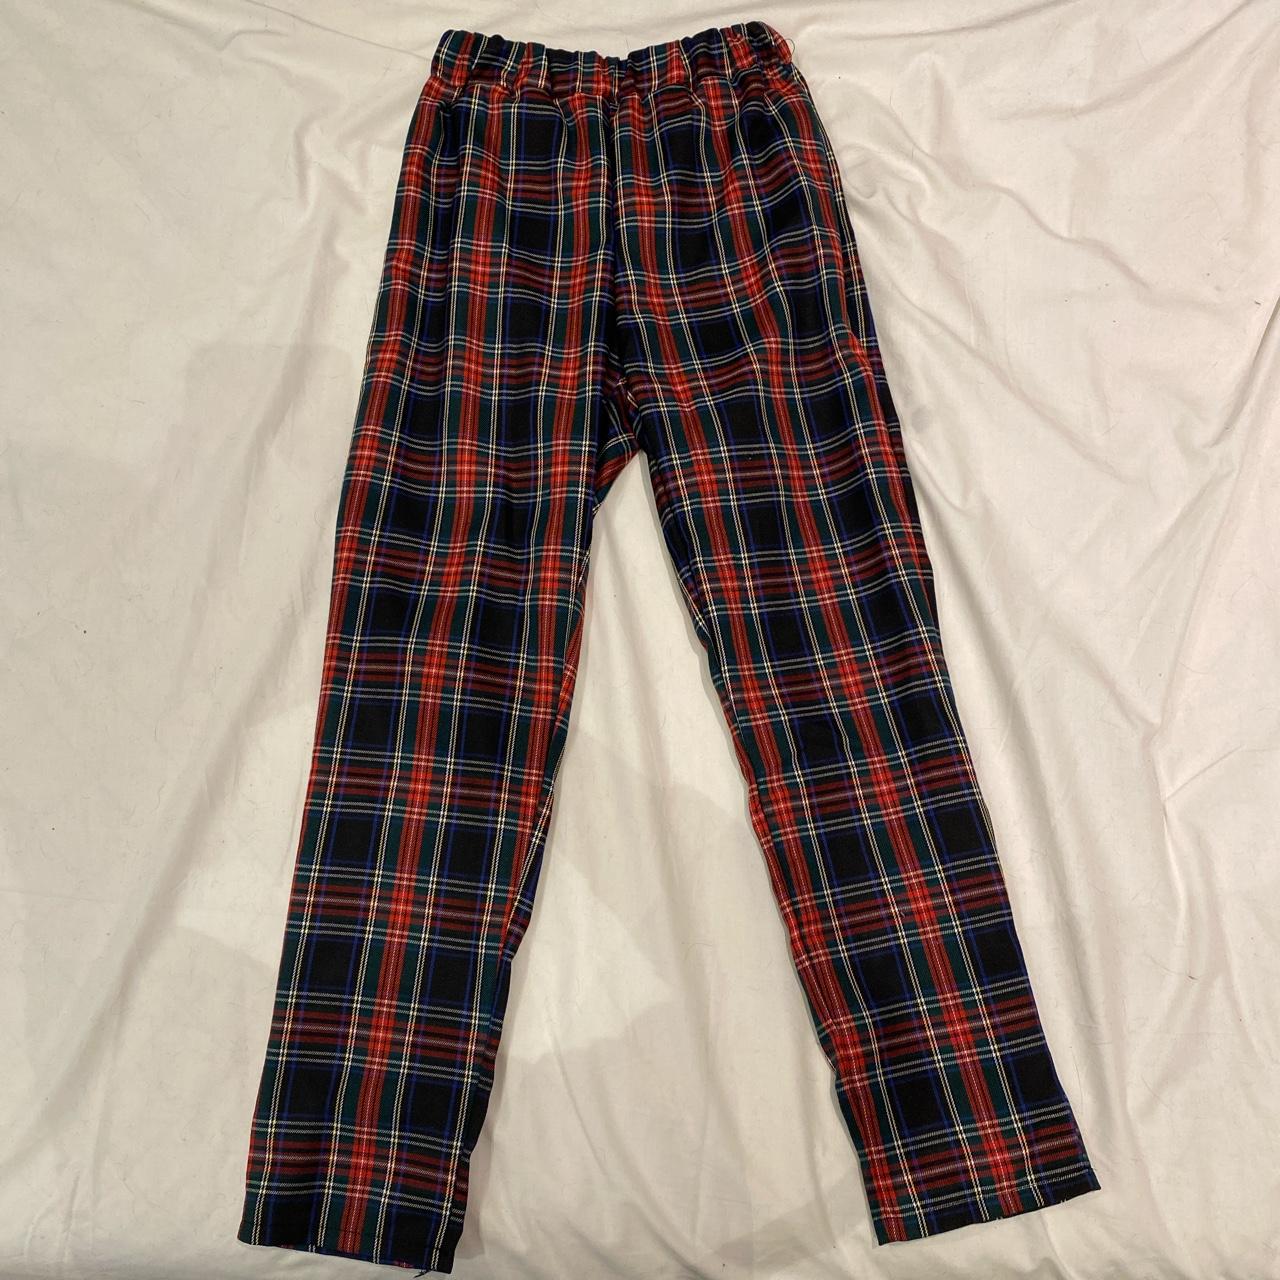 Red and green/blue tartan trousers BRAND NEW!... - Depop